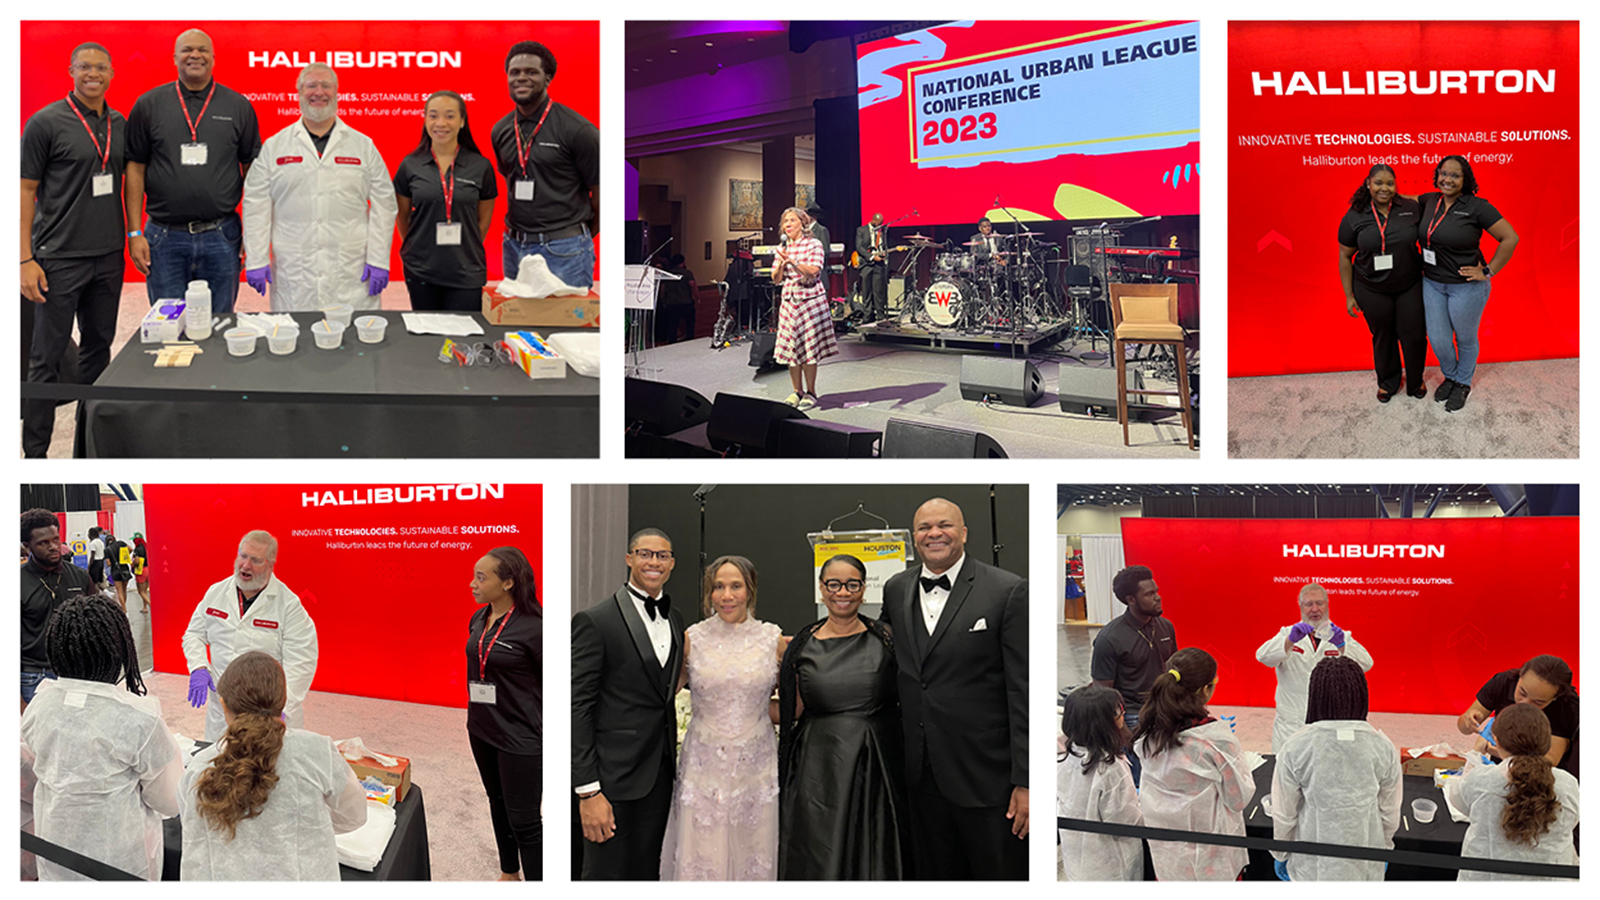 Halliburton volunteers participated in National Urban League Conference events